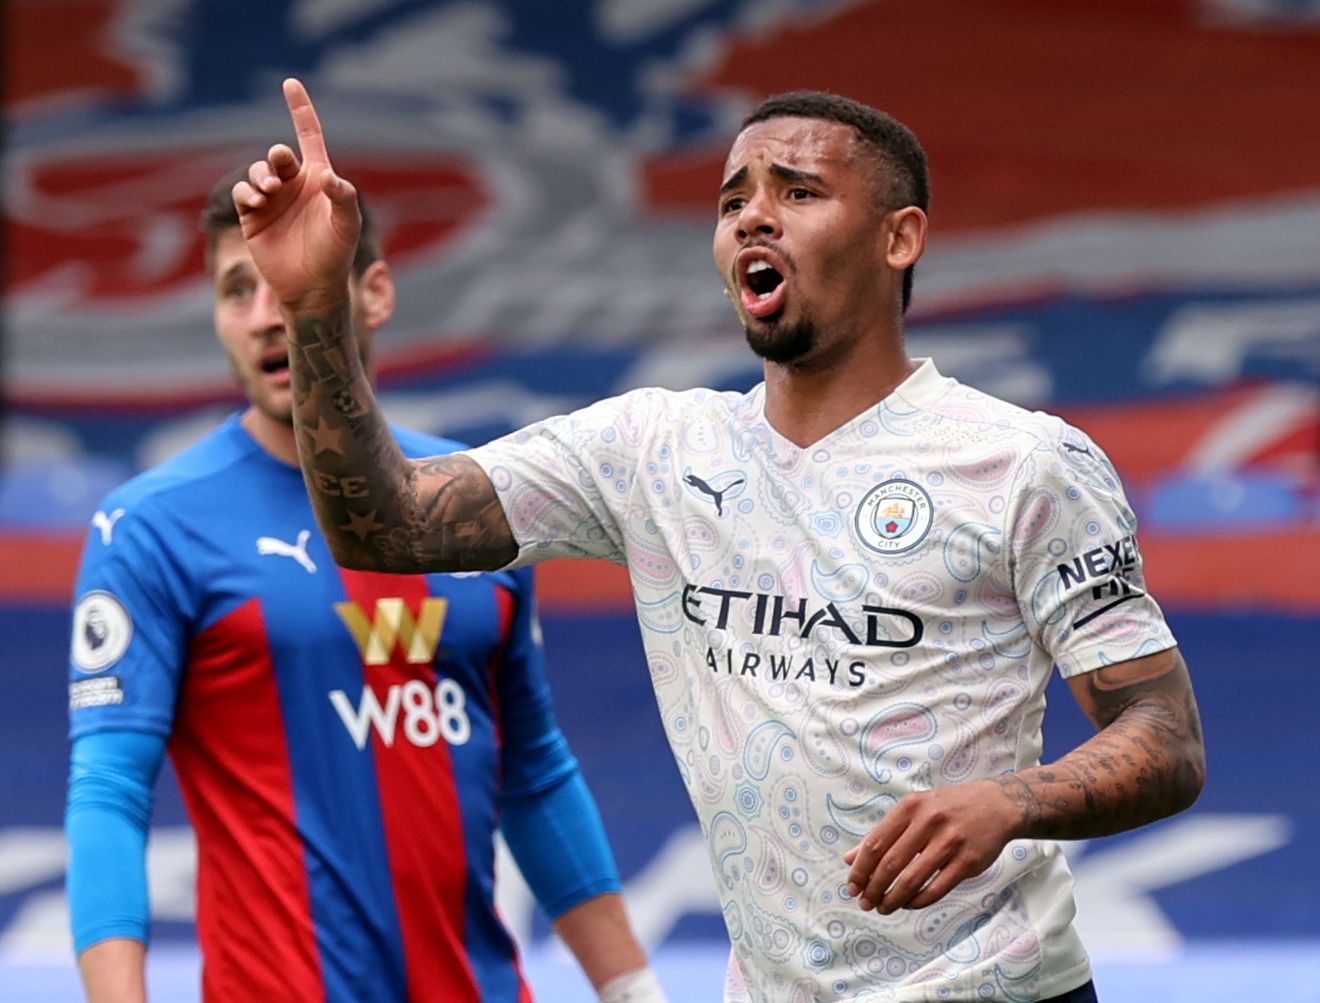 Soccer Football - Premier League - Crystal Palace v Manchester City - Selhurst Park, London, Britain - May 1, 2021 Manchester City's Gabriel Jesus reacts after his goal is disallowed Pool via REUTERS/Clive Rose EDITORIAL USE ONLY. No use with unauthorized audio, video, data, fixture lists, club/league logos or 'live' services. Online in-match use limited to 75 images, no video emulation. No use in betting, games or single club /league/player publications.  Please contact your account representat